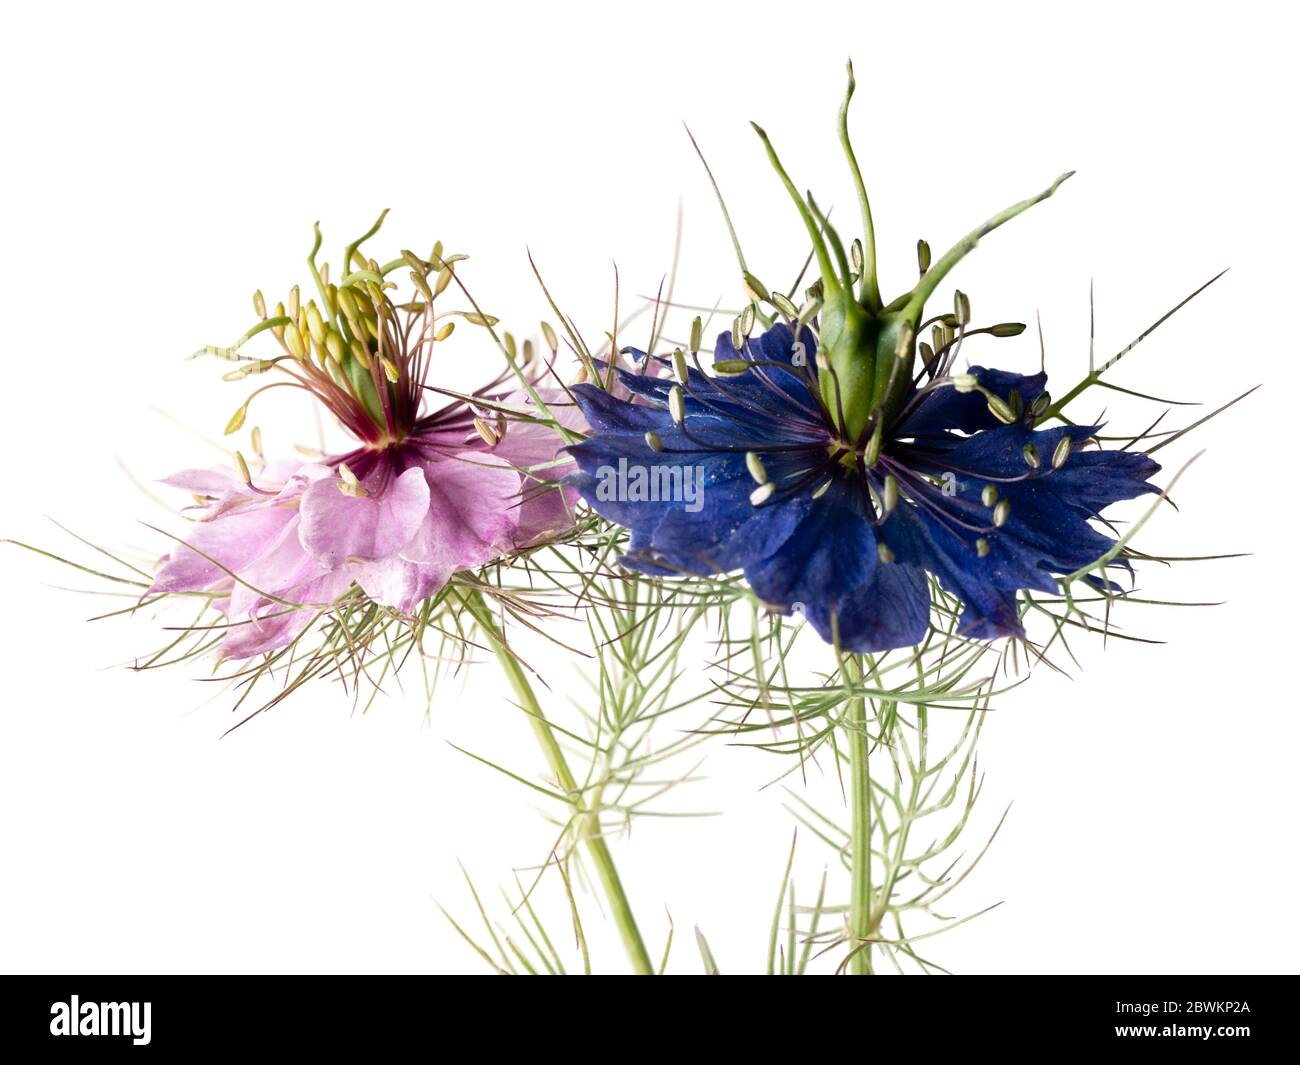 Mixed pink and blue group of the hardy annual Love in the Mist, Nigella damascena, on a white background Stock Photo